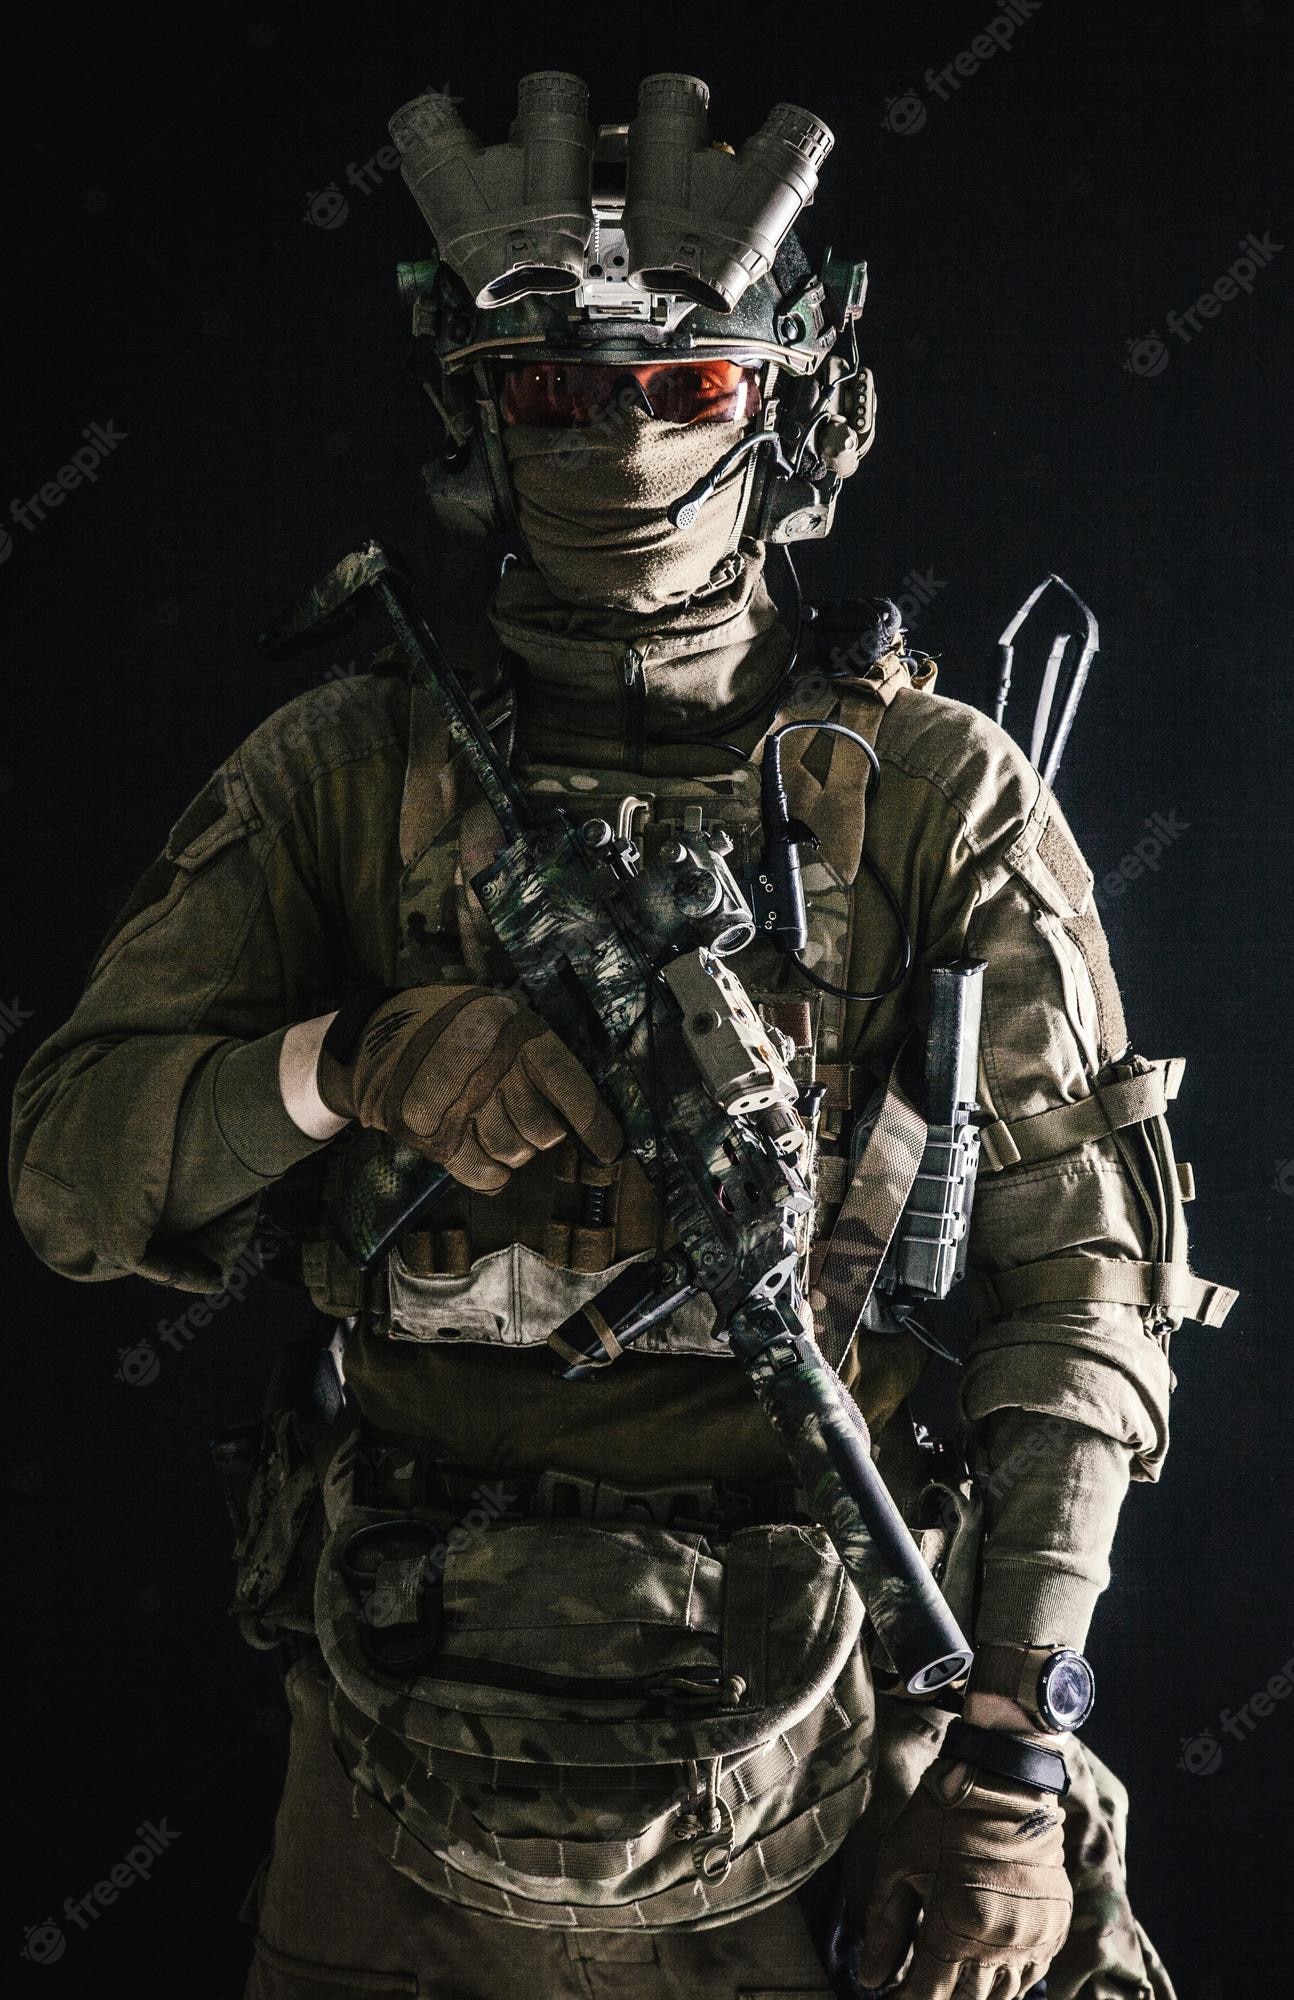 Premium Photo. Antiterrorist squad fighter army elite forces soldier in combat uniform and tactical ammunition armed mini submachine gun wearing nightvision device low key studio portrait on black background